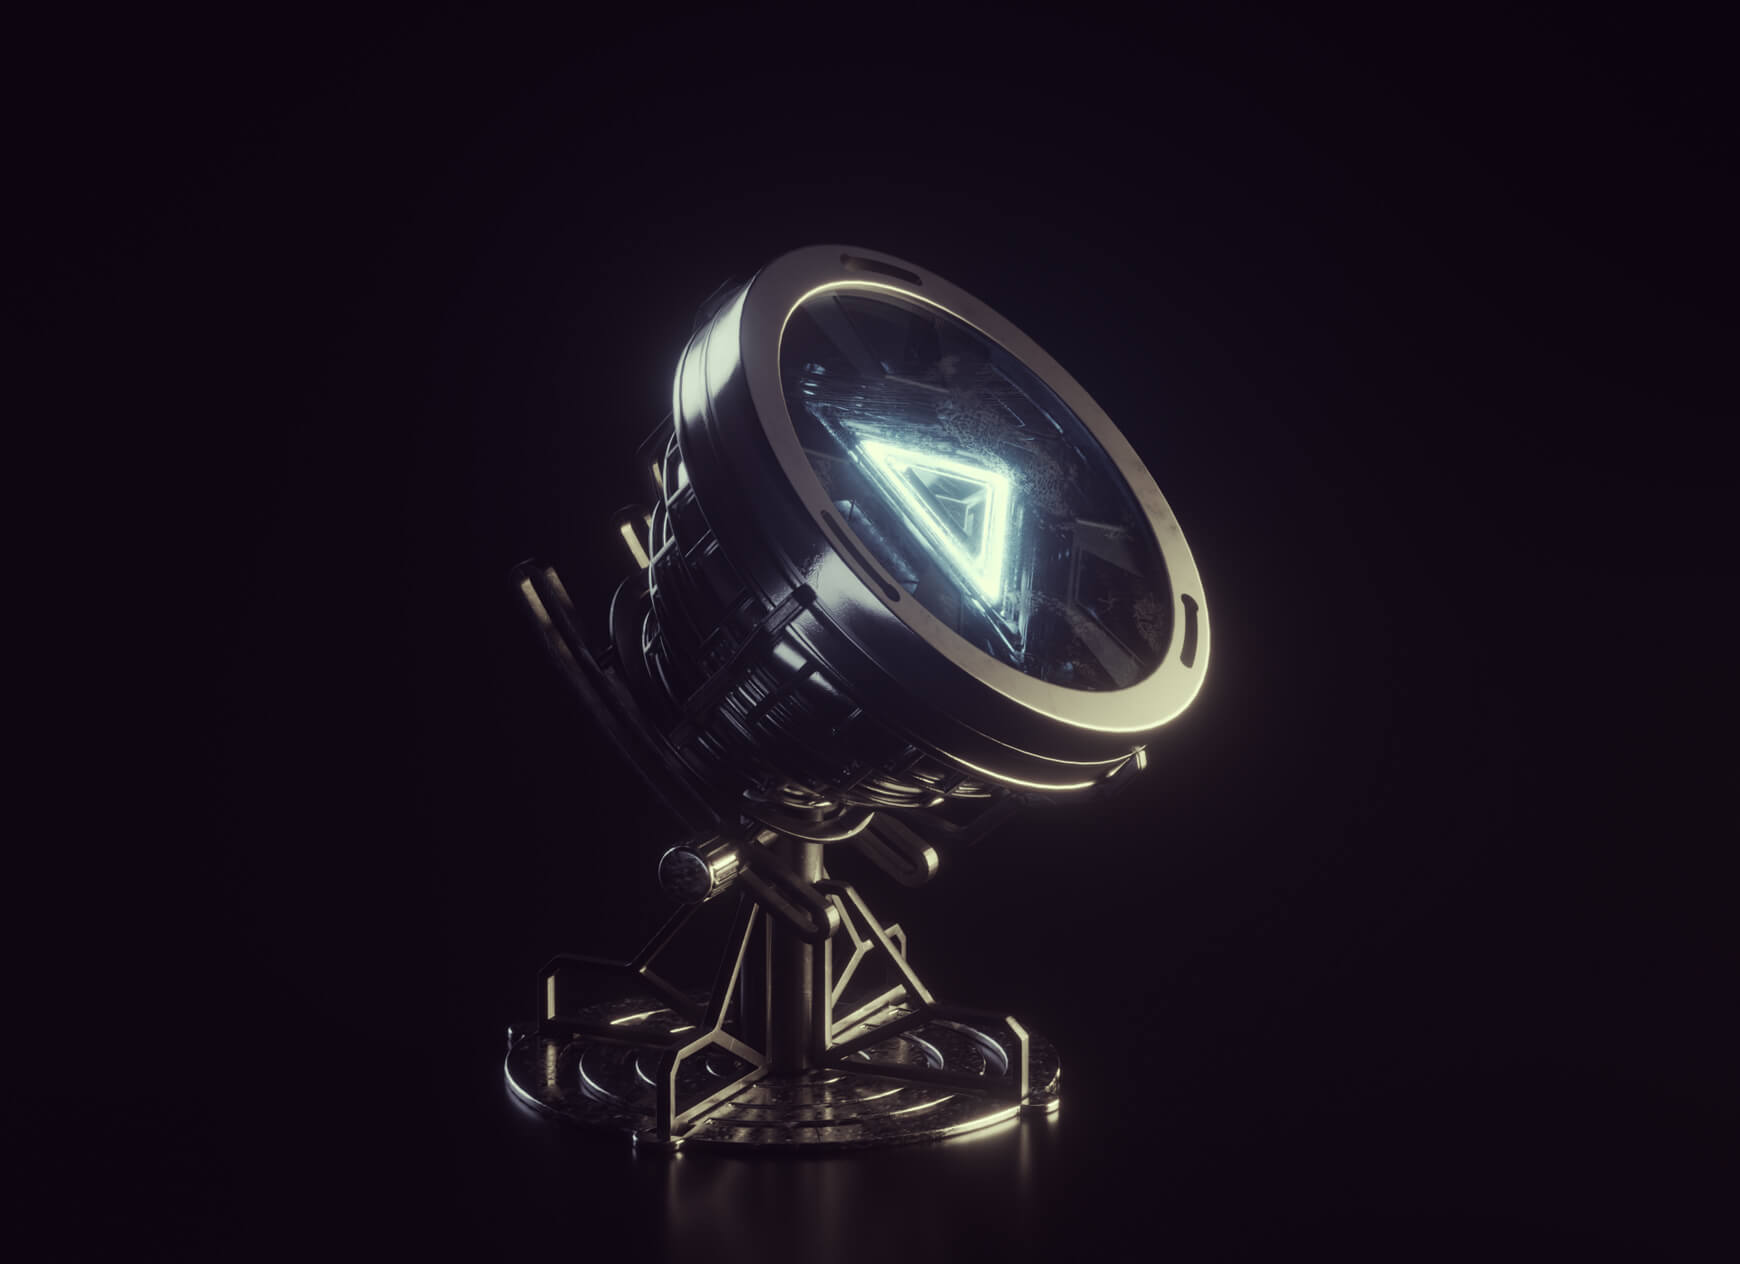 Cinema 4D Otoy Octane Shader Texture Material Pack VFX Visual Effects